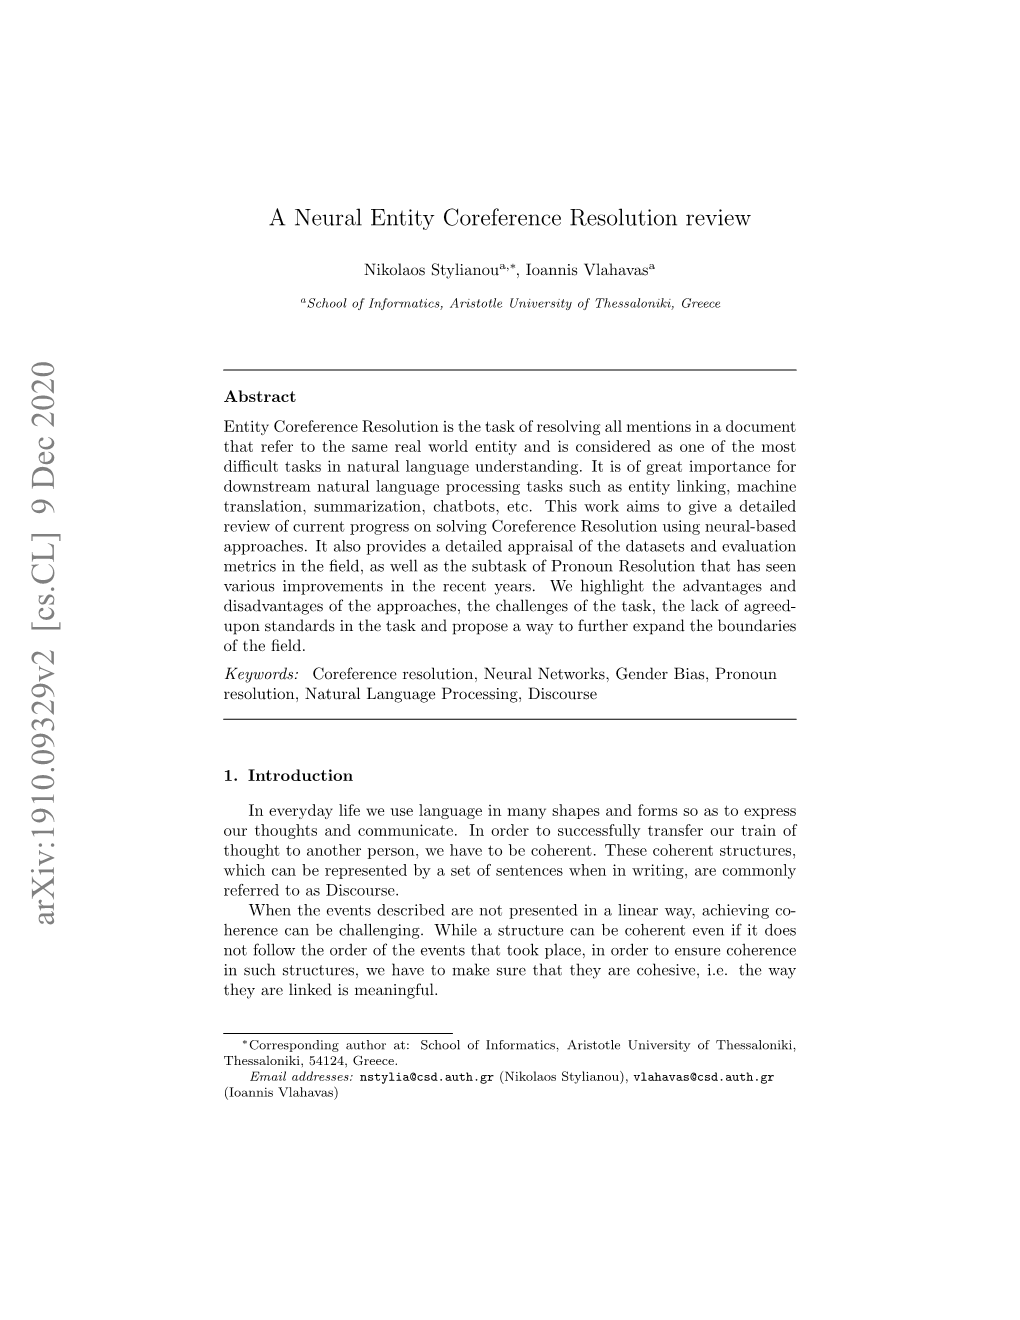 A Neural Entity Coreference Resolution Review